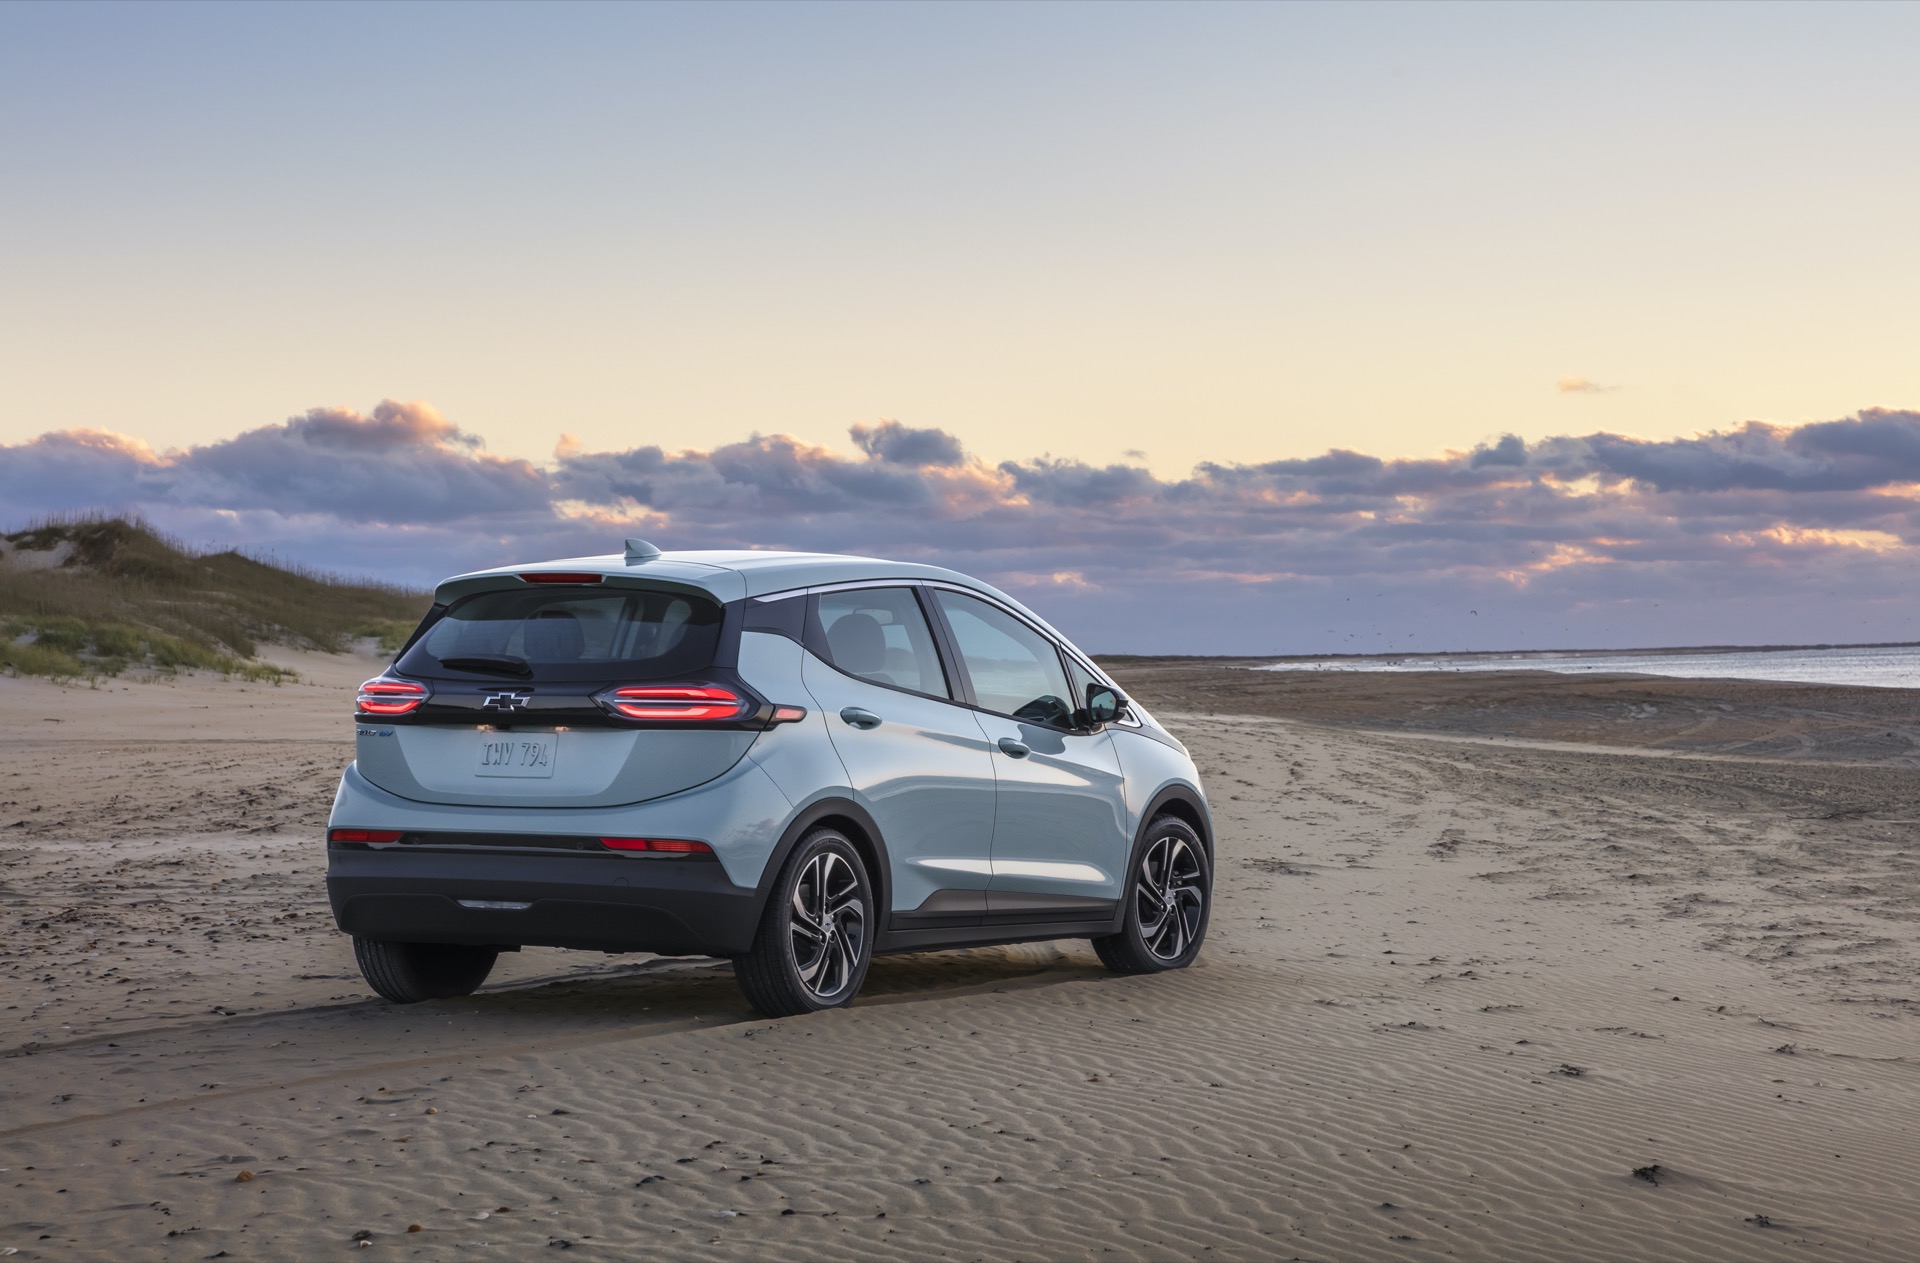 Ahead of cheaper 2023 Chevy Bolt EV, GM incentive gives 2022 models